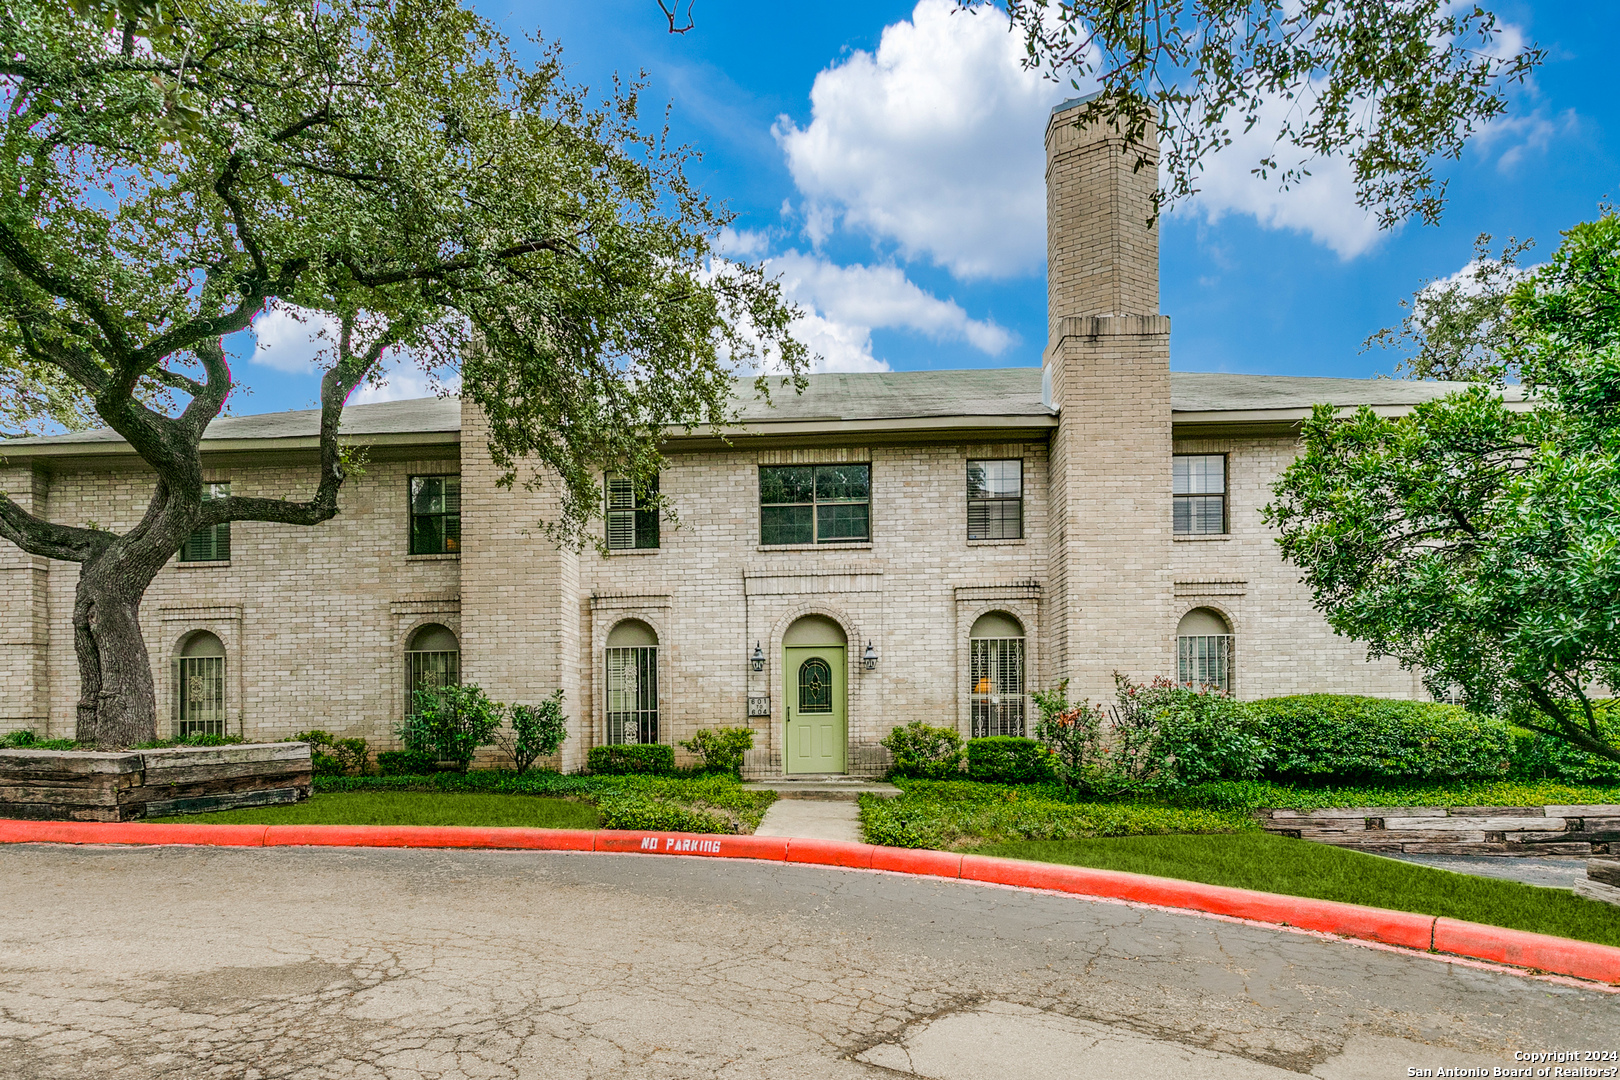 Upstairs unit boasting open floor plan, plantation shutters, two assigned parking spots, fireplace, and more. Community features gated access off Wurzbach and Fredericksburg, great community pool, & mature oaks throughout.Great access to Medical Center, UTSA & shopping-fantastic opportunity!